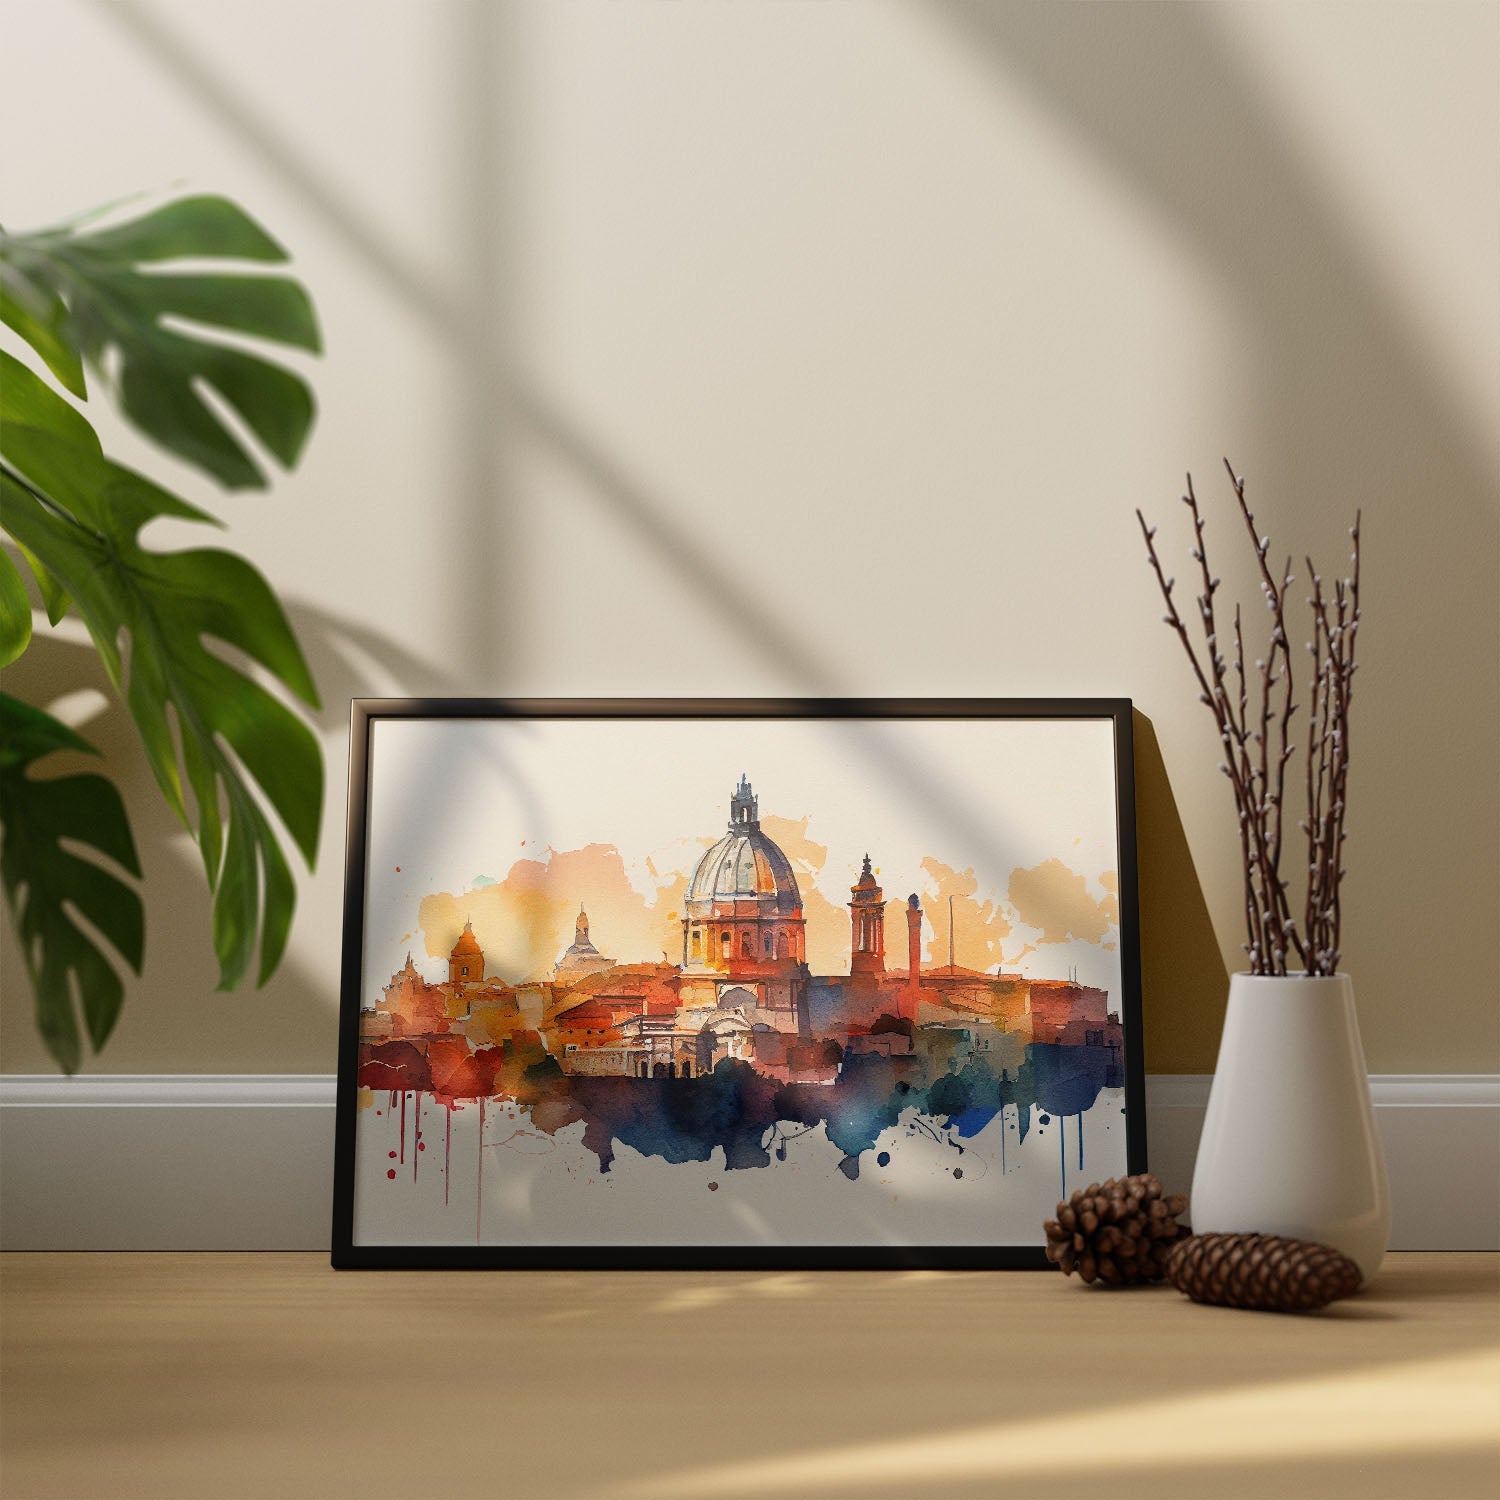 Nacnic watercolor of a skyline of the city of Rome_1. Aesthetic Wall Art Prints for Bedroom or Living Room Design.-Artwork-Nacnic-A4-Sin Marco-Nacnic Estudio SL